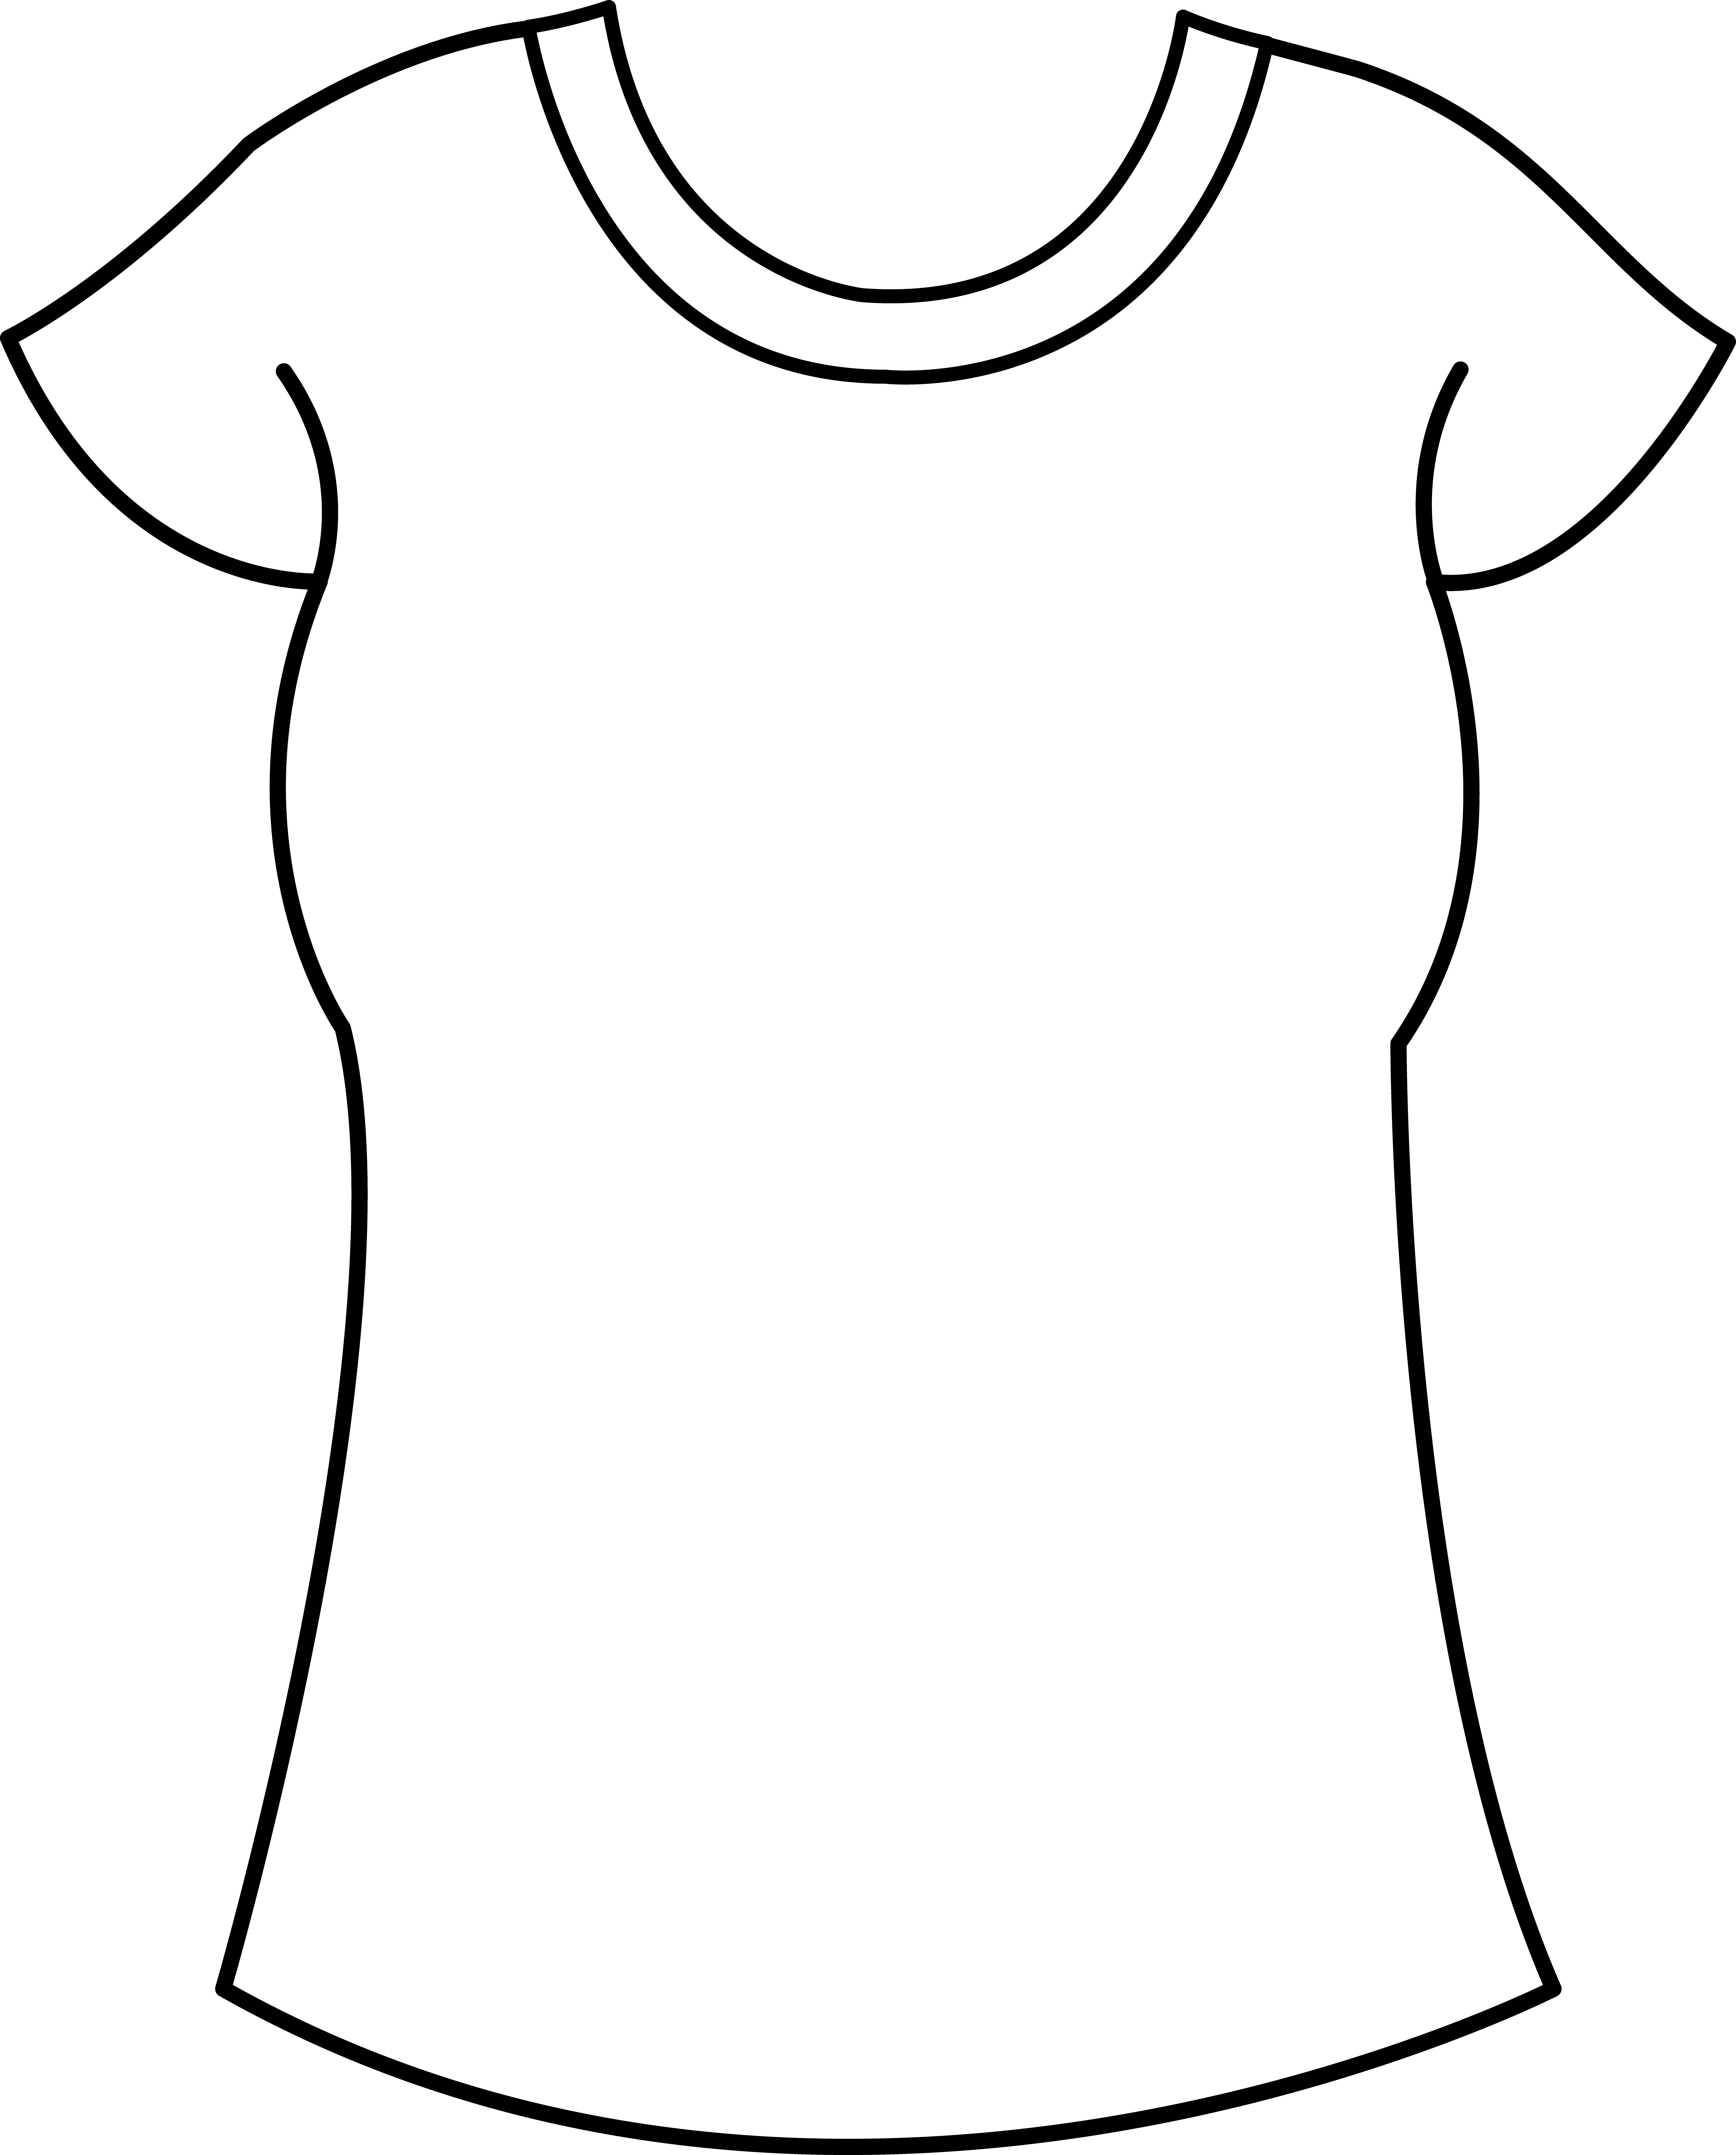 Painting clipart t shirt. Printable clothes templates womens